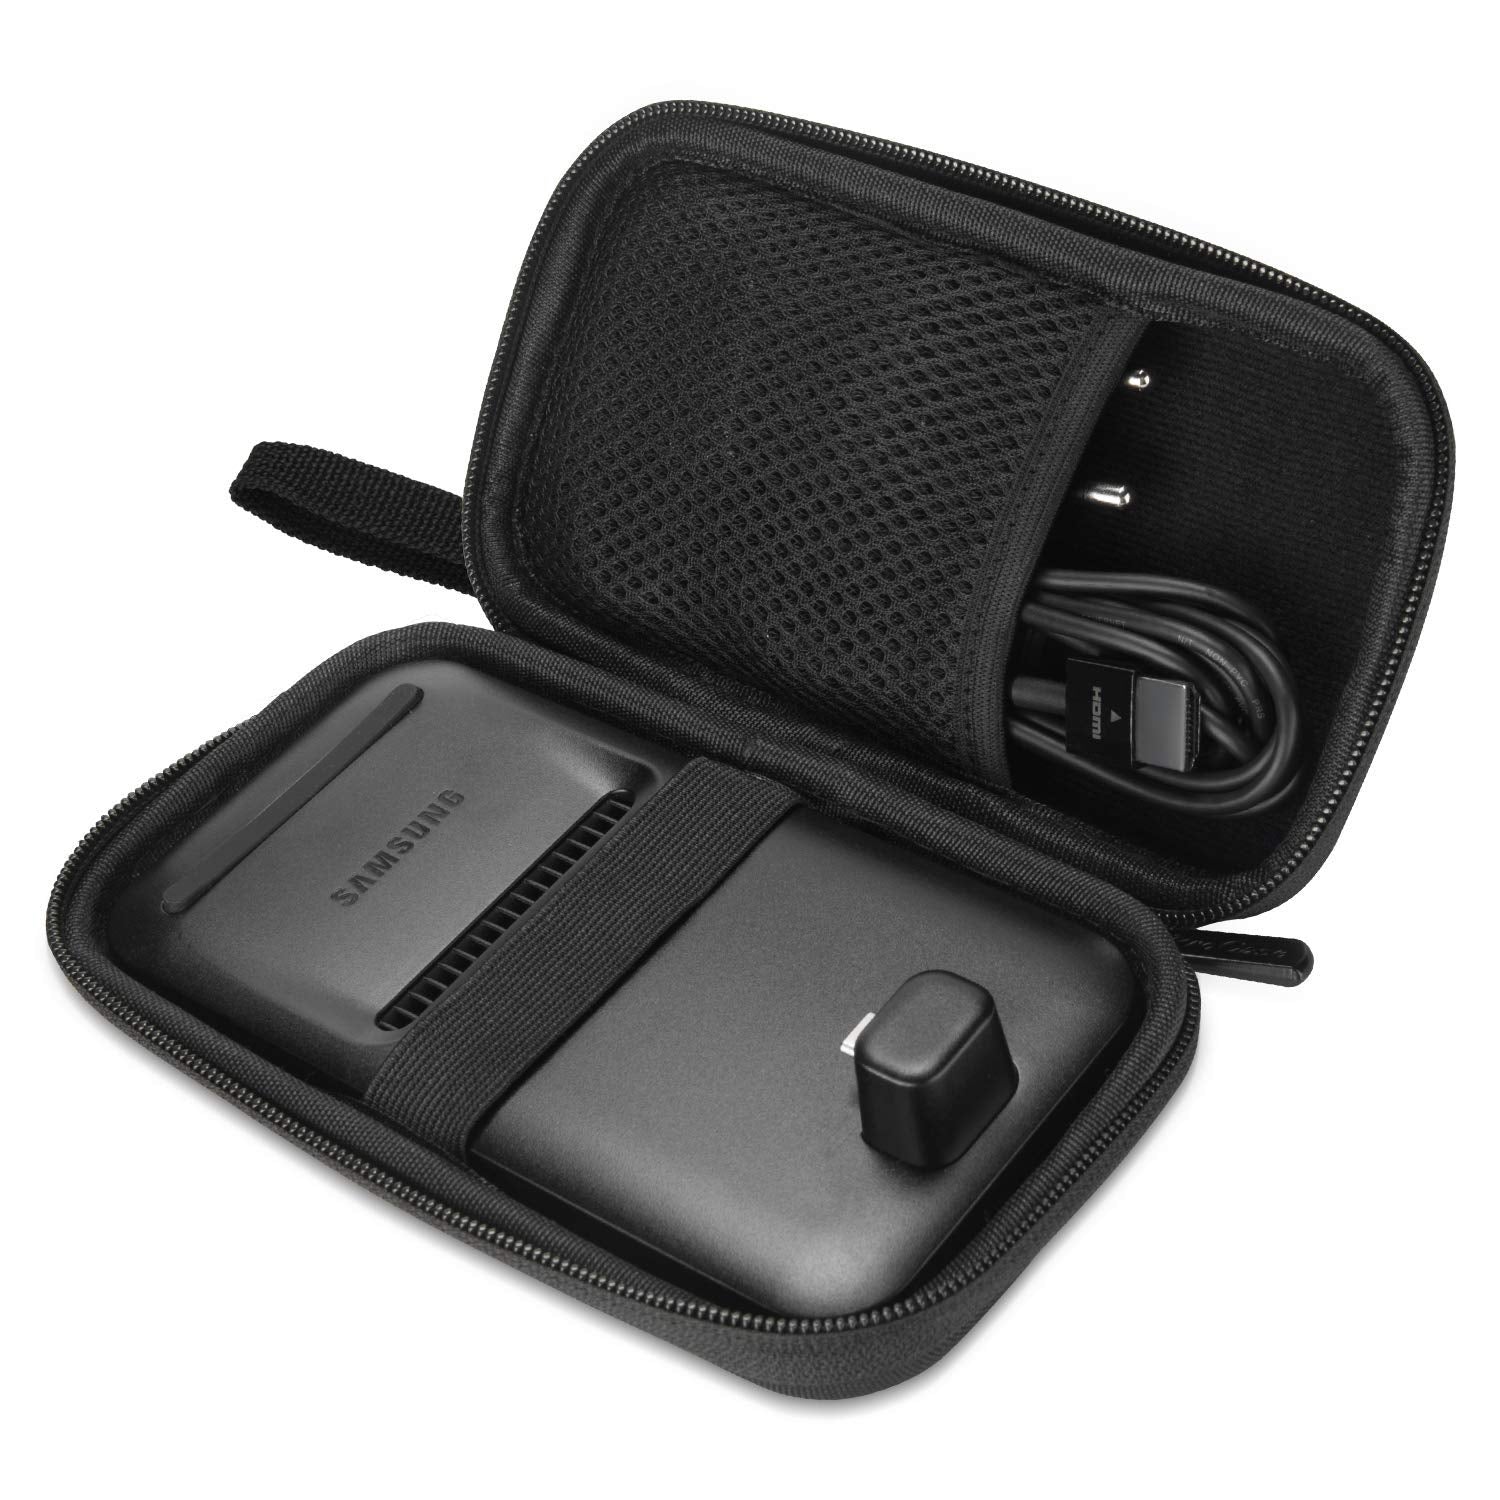 Travel Carrying Case for Samsung DeX Pad